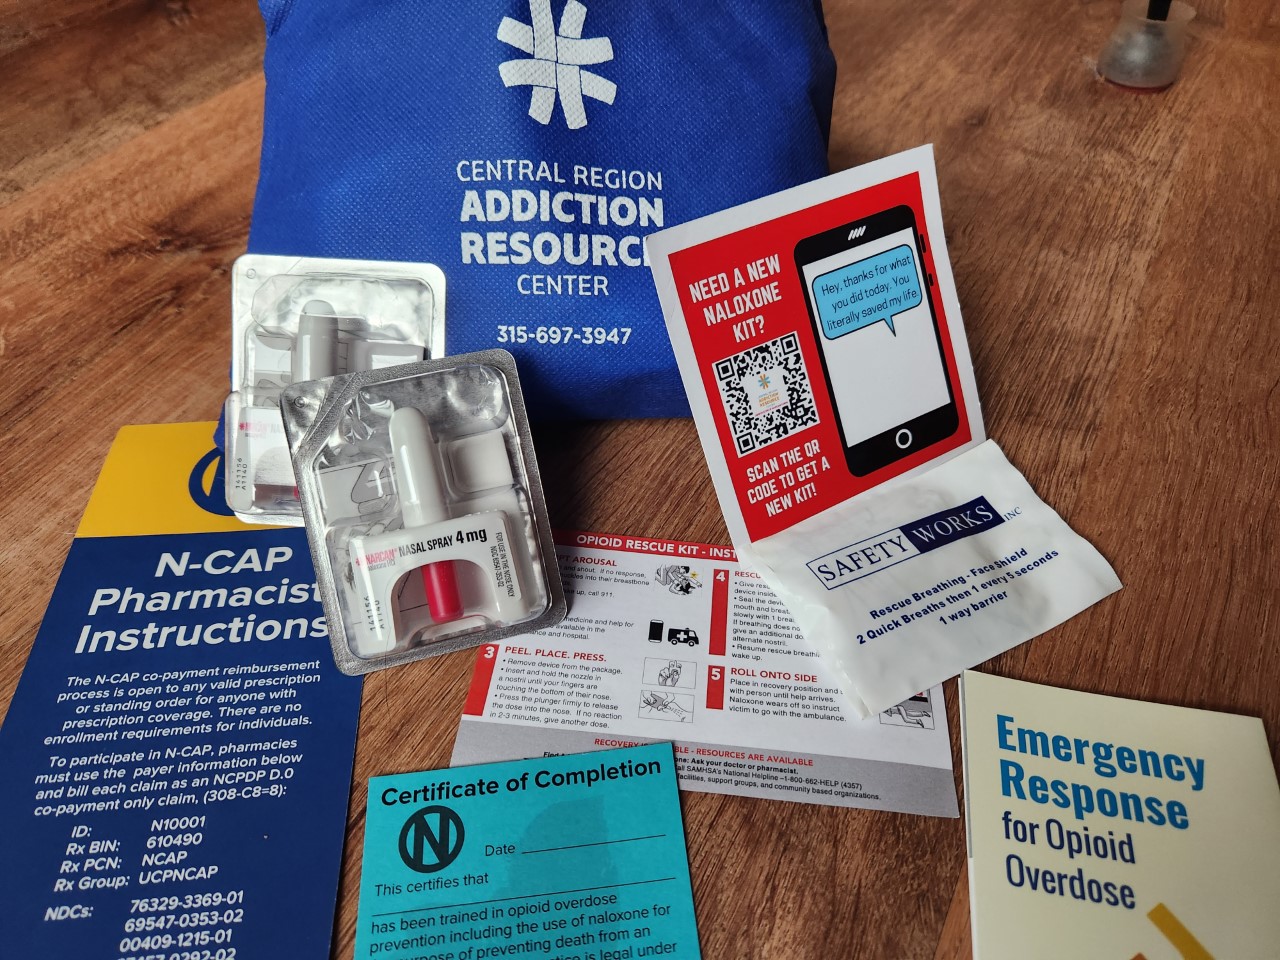 This is how the FREE Narcan kit arrives at to your home in NYS.